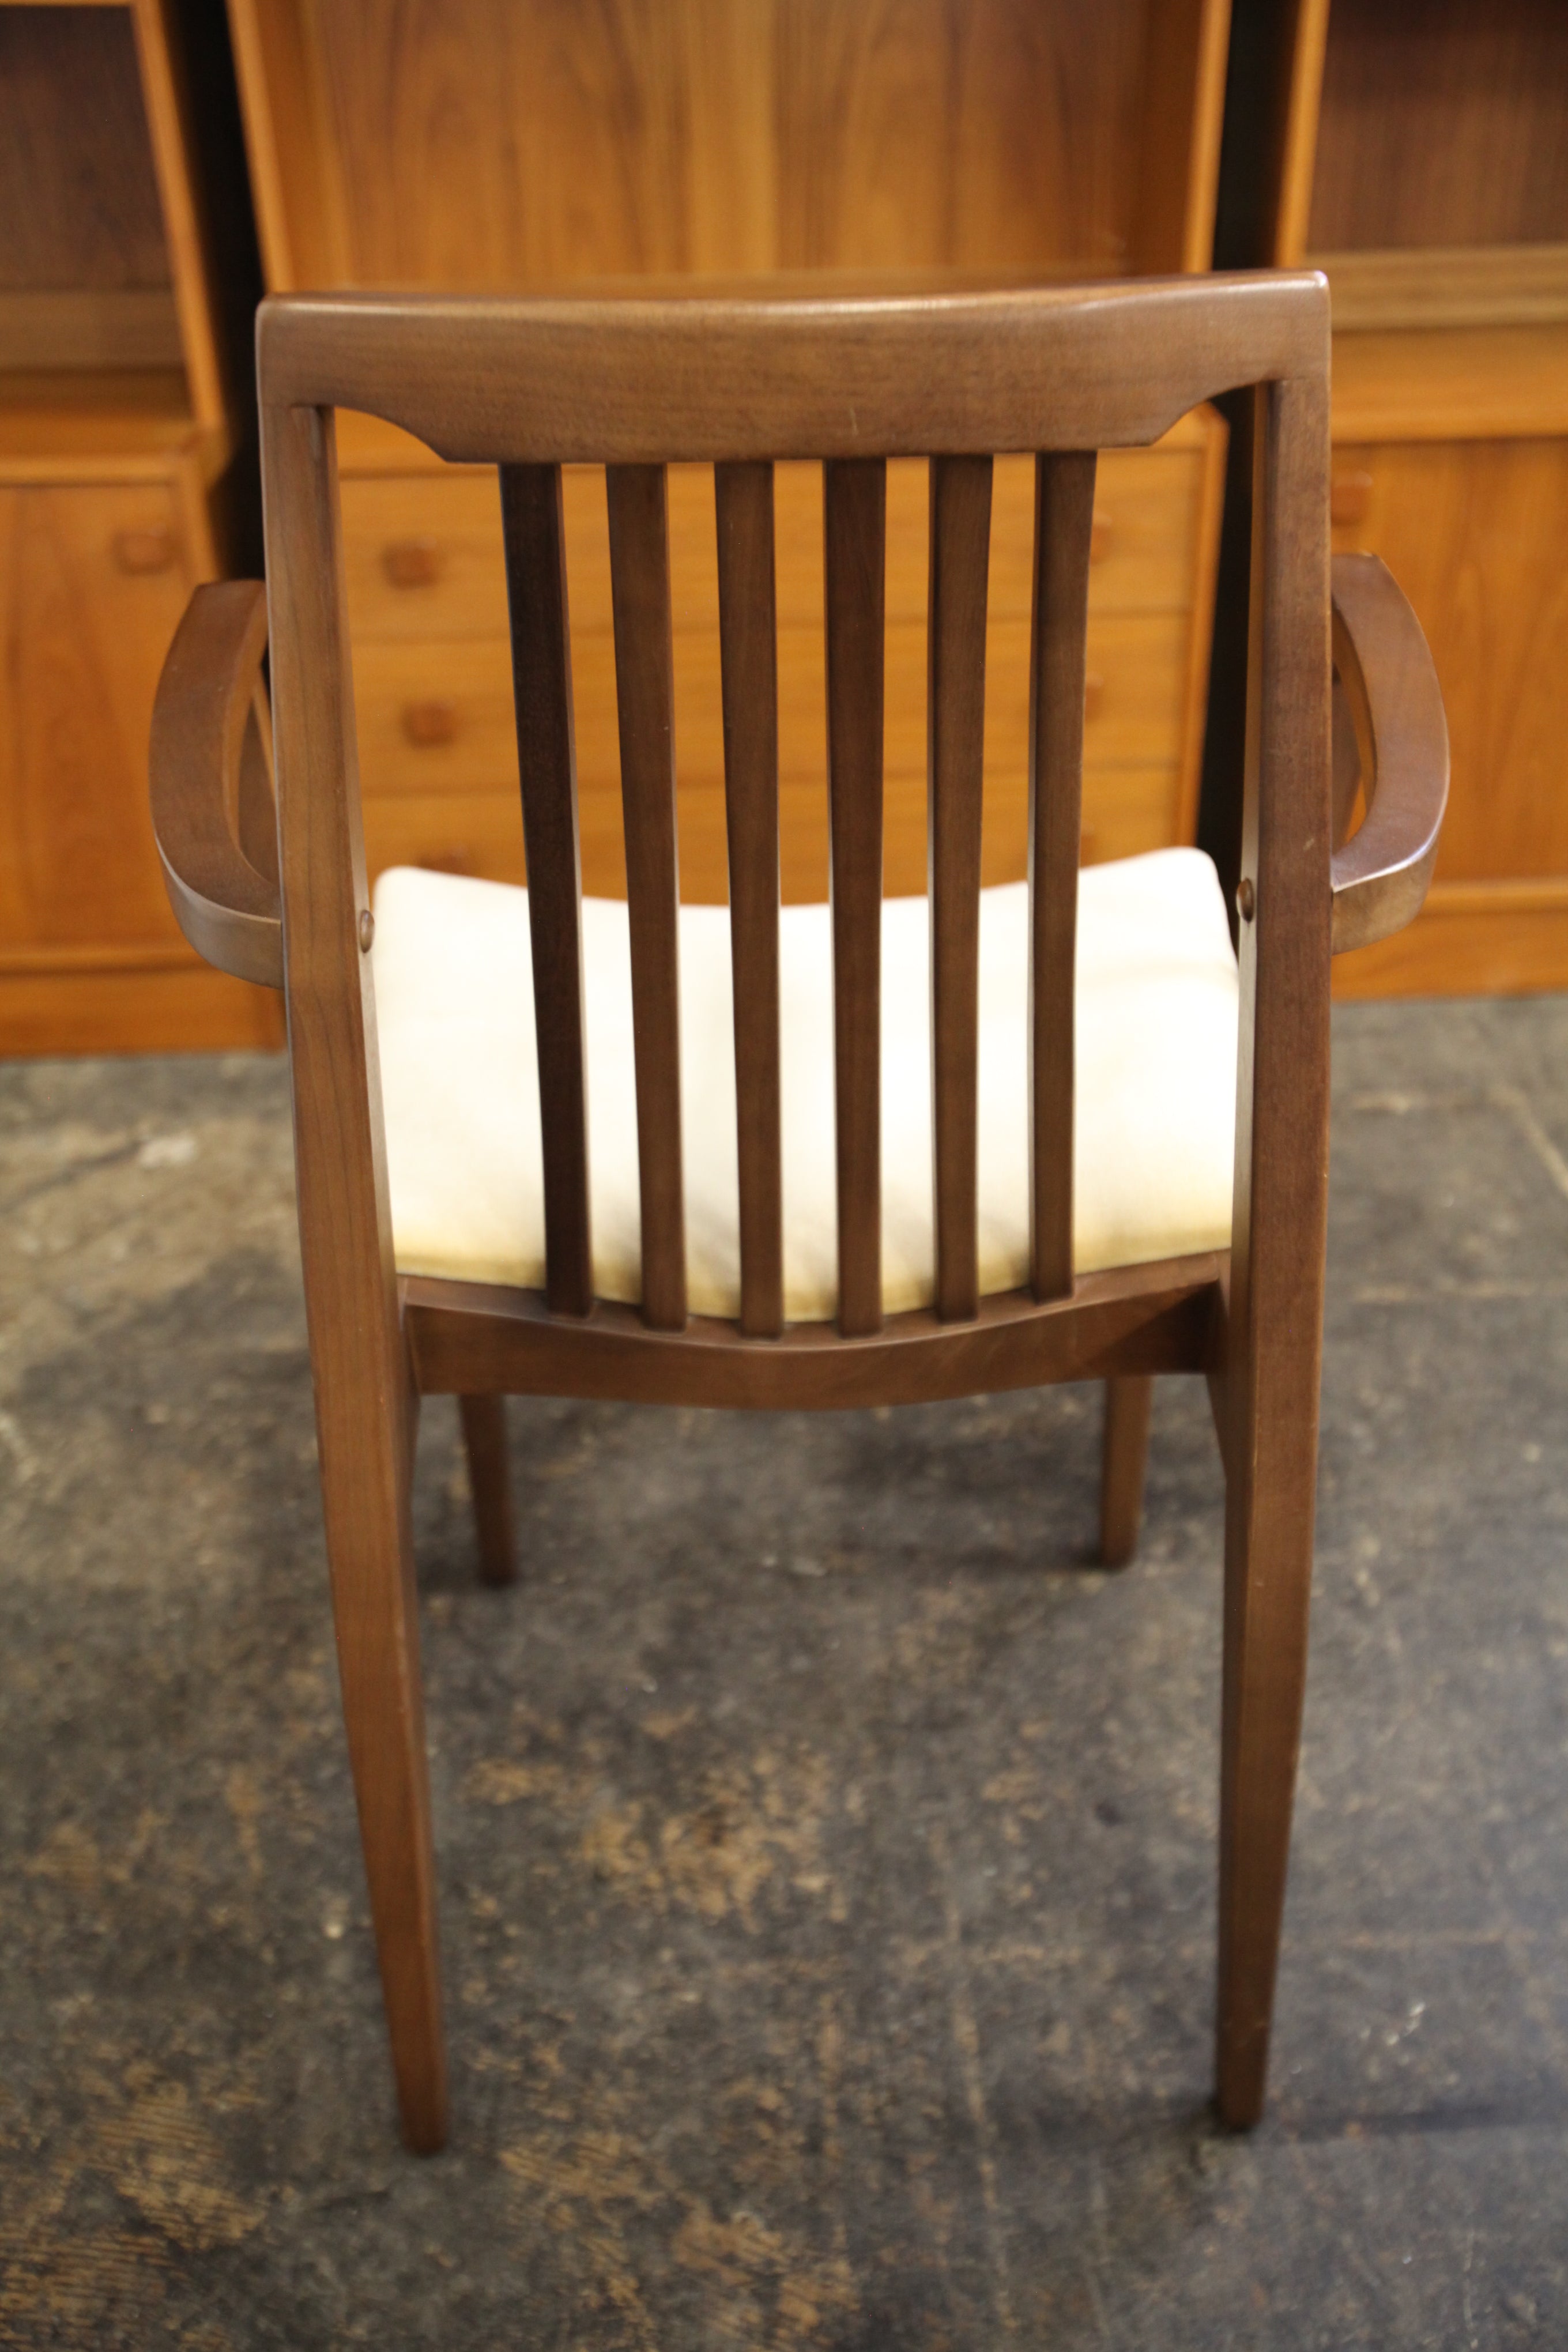 Set of 4 Vintage Honderich Walnut Dining Chairs (19"W x 34.25"H x 18"D)